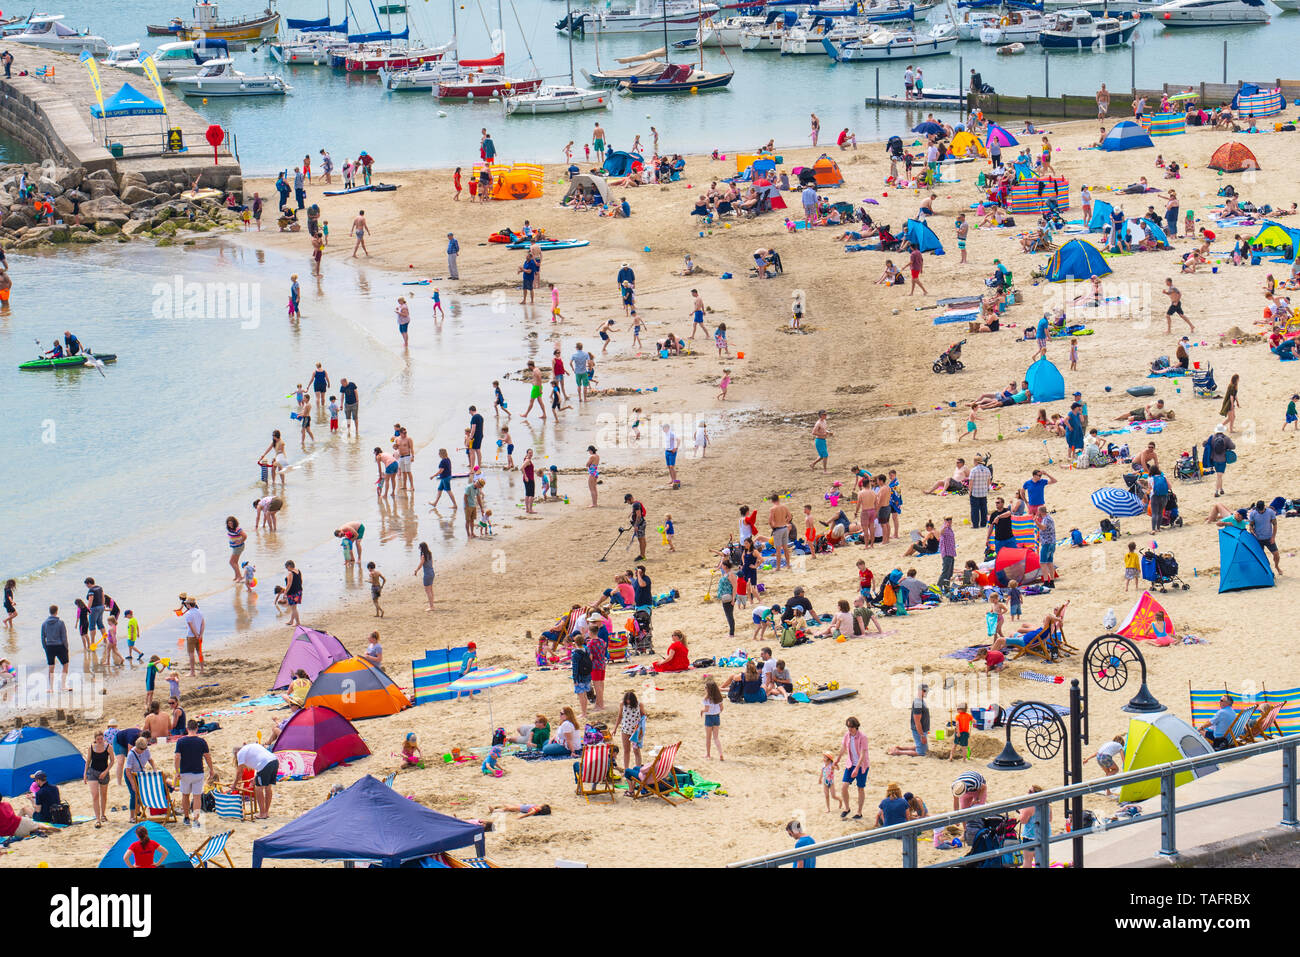 Lyme Regis, Dorset, UK. 25th May 2019. UK Weather: Crowds of holidaymakers and visitors flock to the beach at Lyme Regis to  bask in hot sunshine as the coastal resort sizzles on the hottest day of the year so far. Saturday is set to be the sunniest day of the late May bank holiday weekend.  Credit: Celia McMahon/Alamy Live News. Credit: Celia McMahon/Alamy Live News Stock Photo